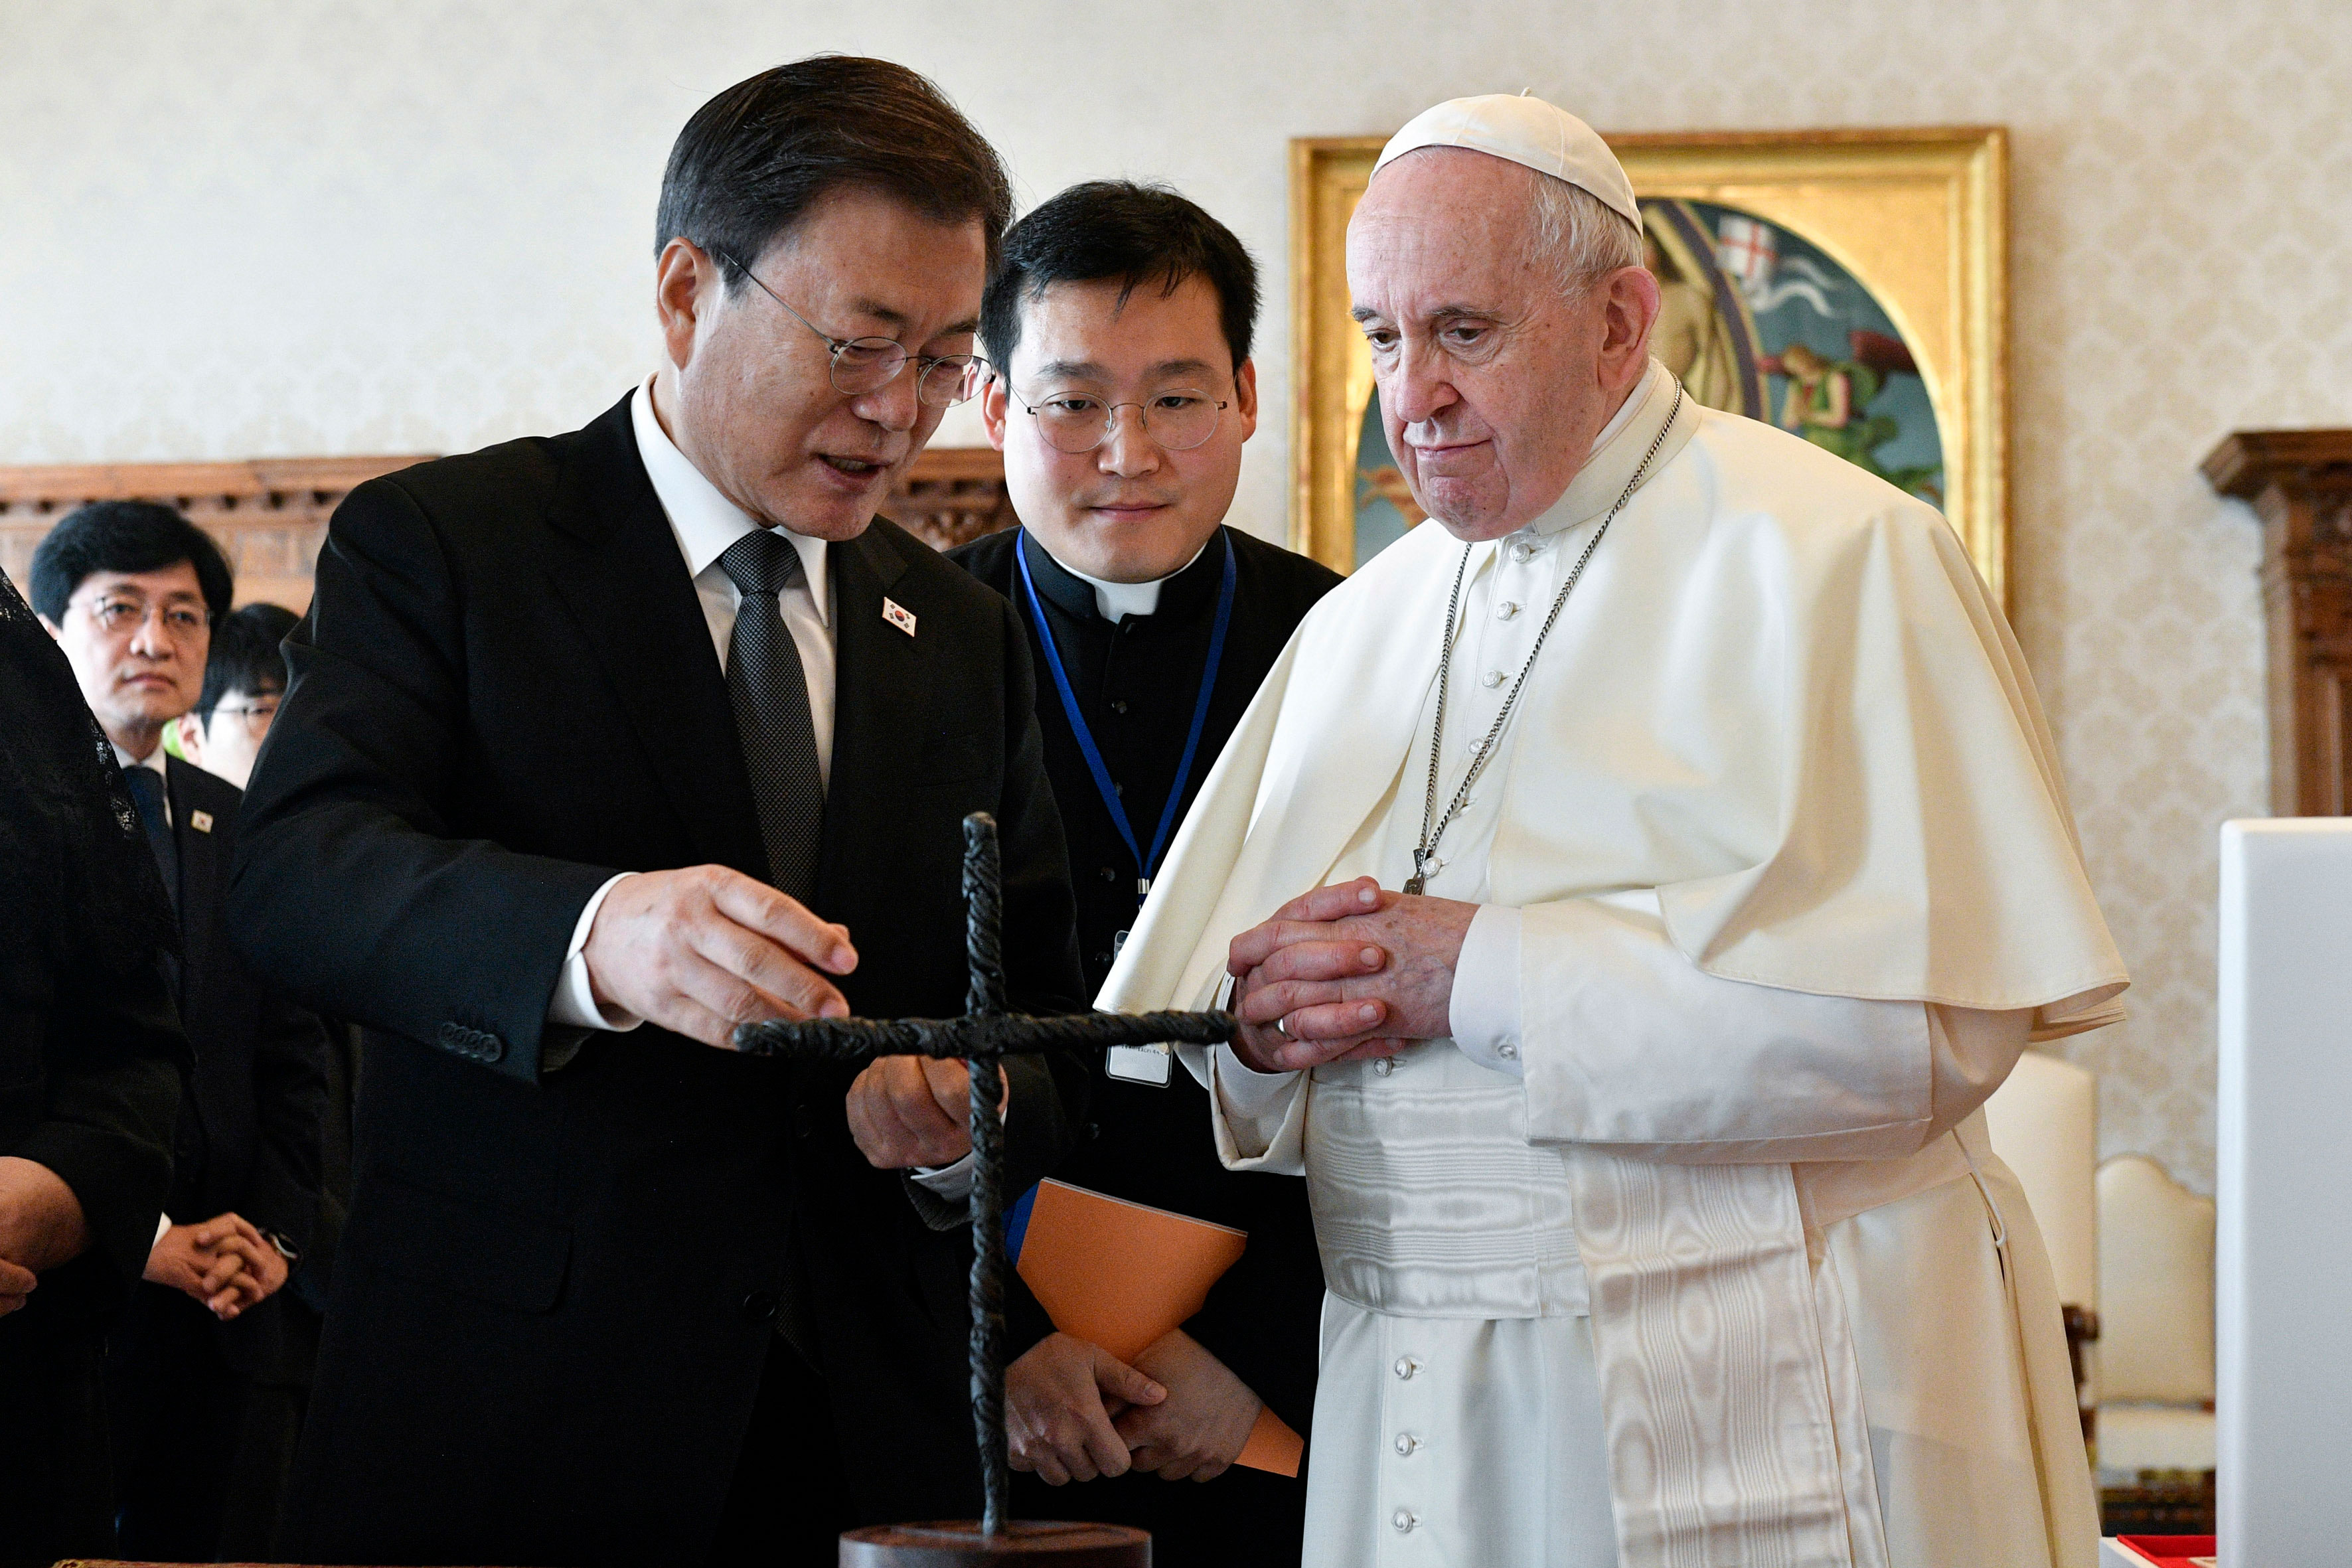 South Korea's President Moon Jae-in exchanges gifts with Pope Francis as they meet at the Vatican on October 29.